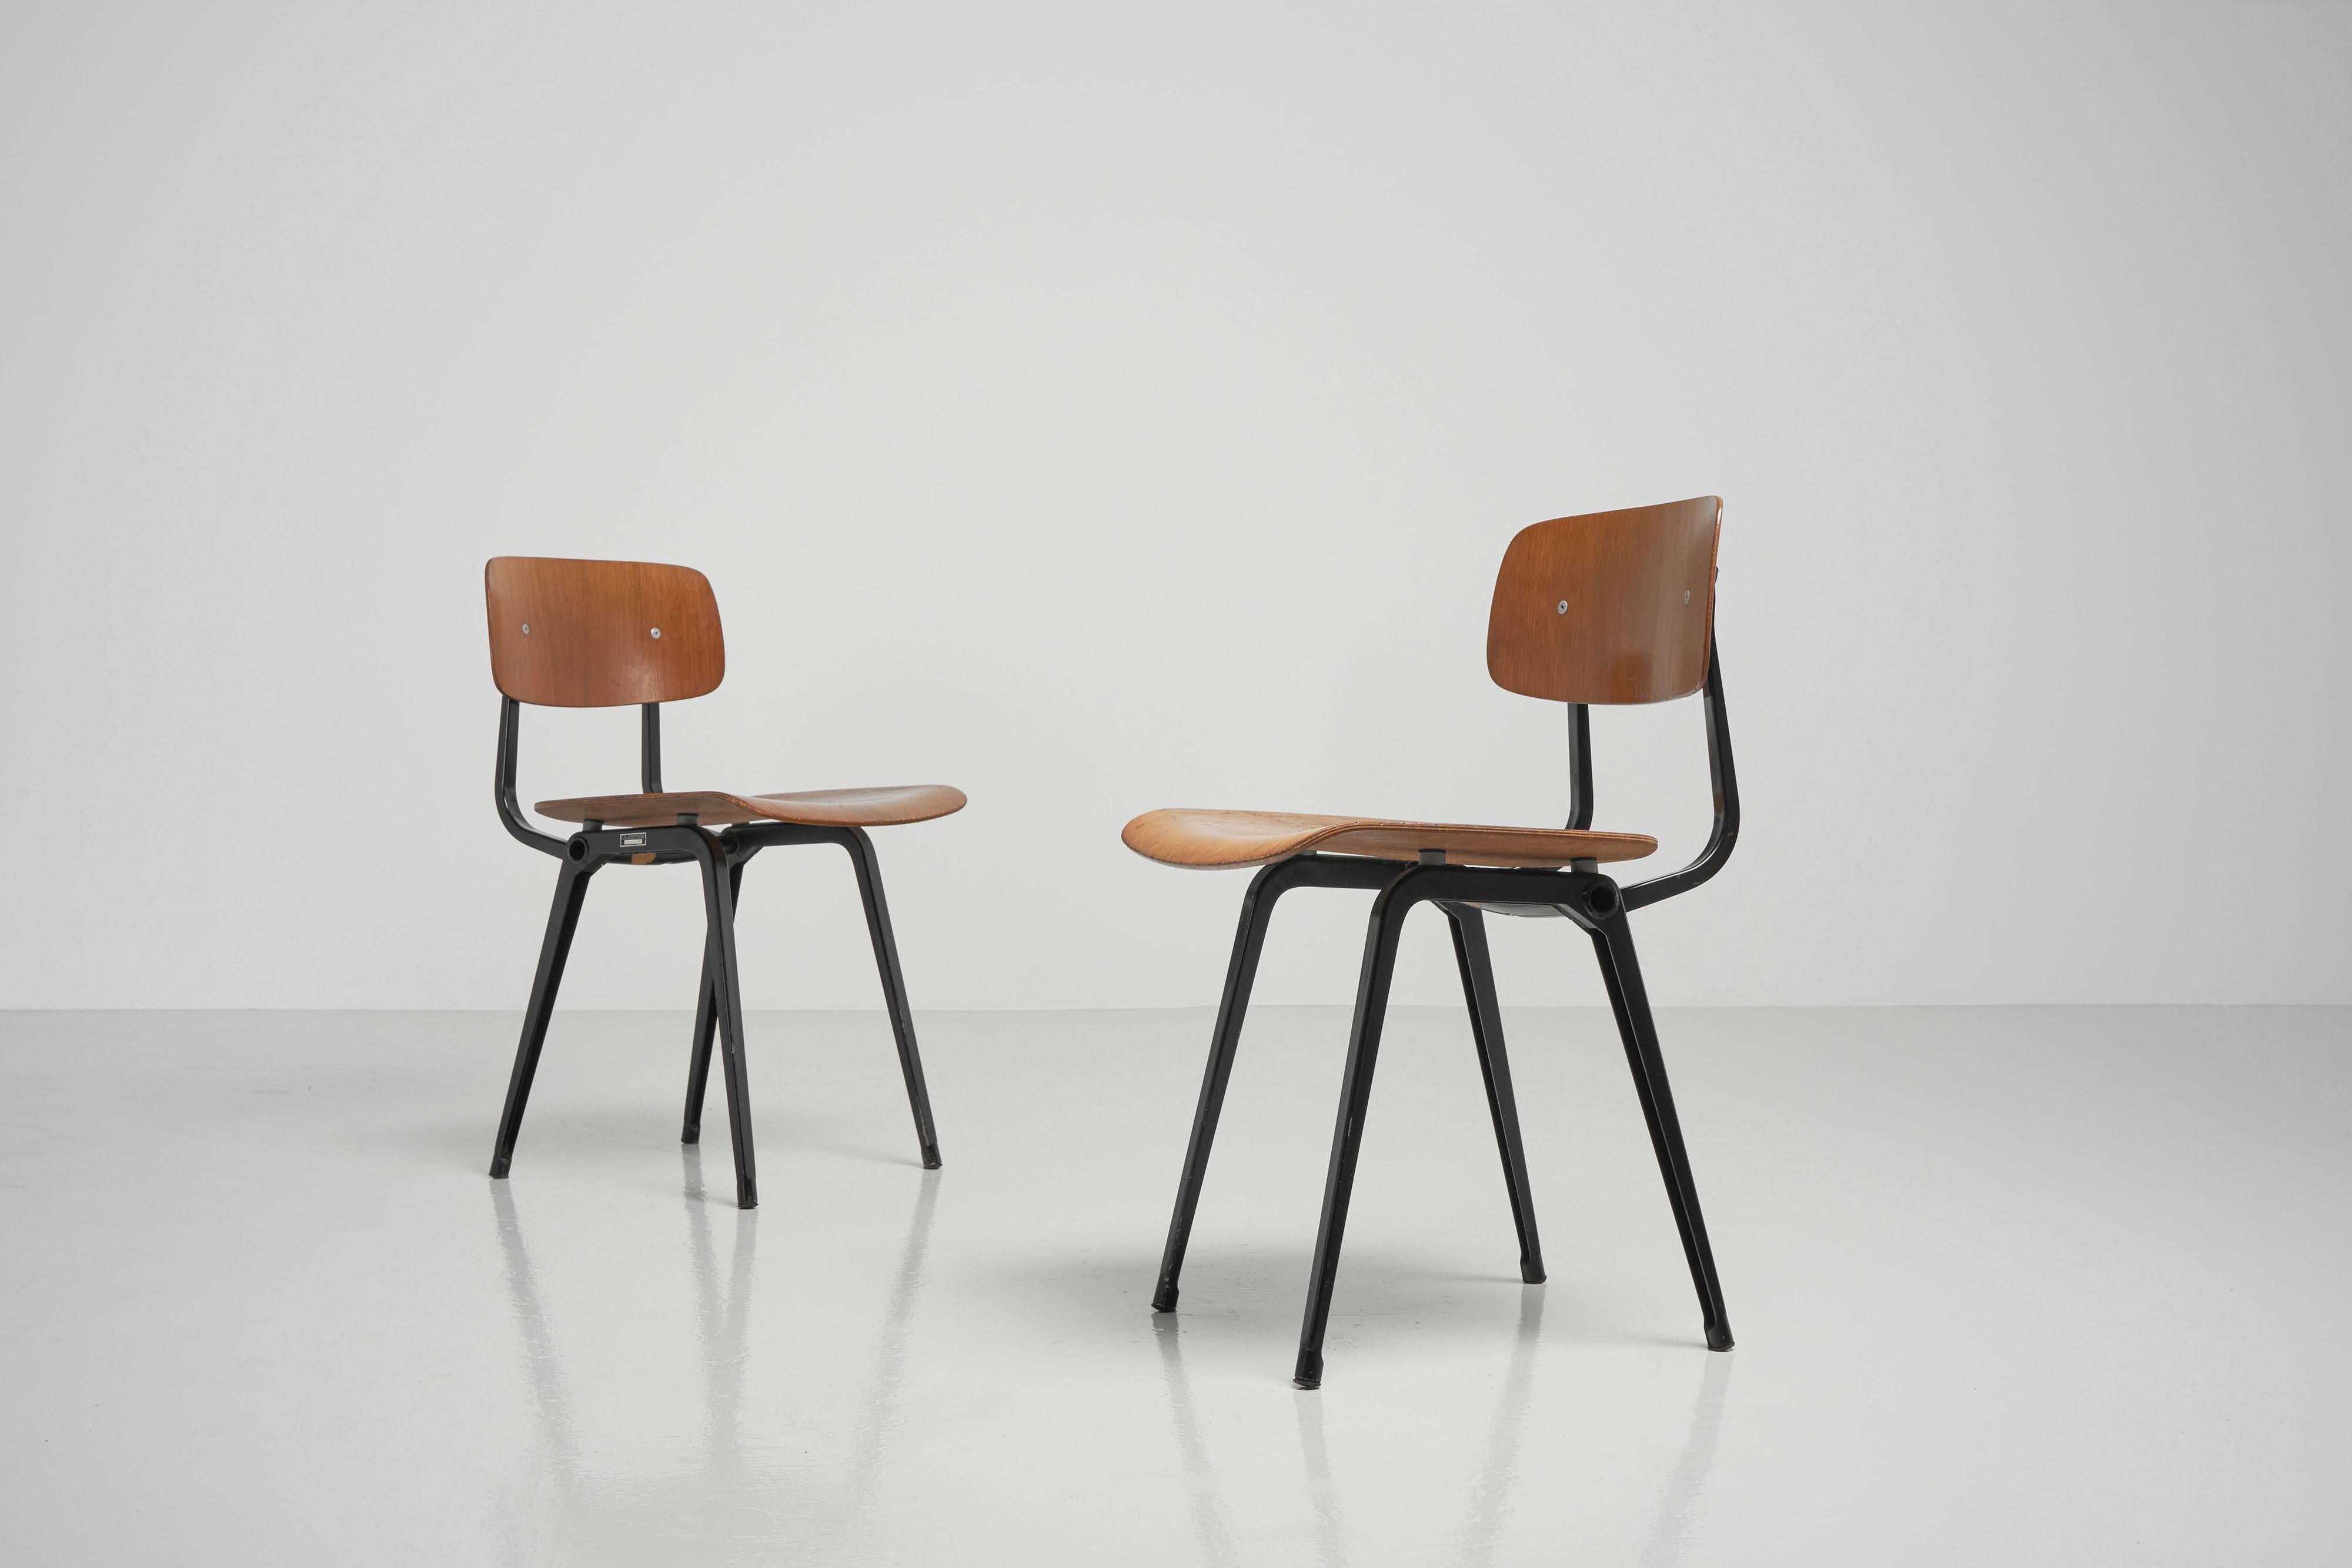 Friso Kramer Revolt chairs teak The Netherlands 1960 In Good Condition For Sale In Roosendaal, Noord Brabant